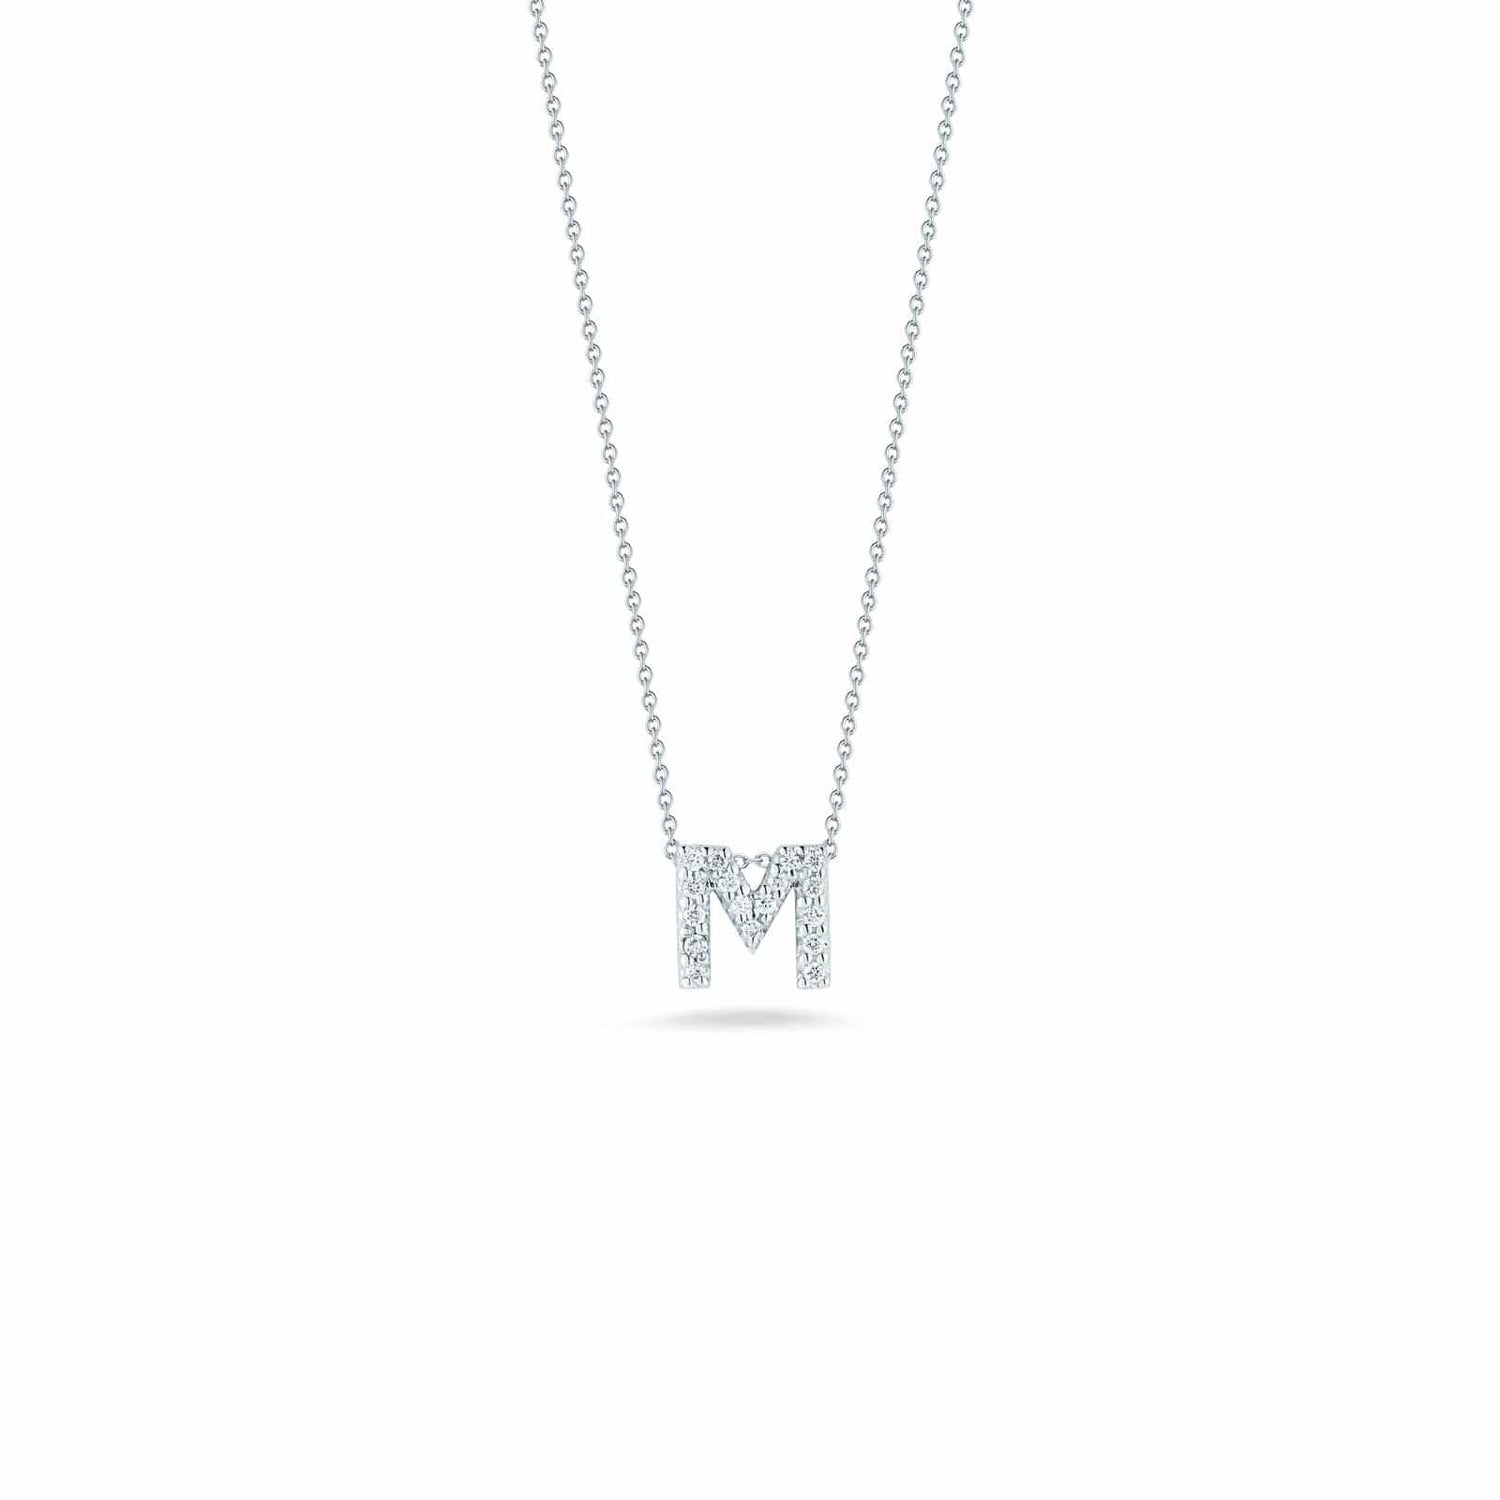 2021 New Classic M Letter Pendant Titanium Steel Short Necklace For Woman  Korean Fashion Jewelry Girl's Sexy Clavicle Neck Chain - AliExpress